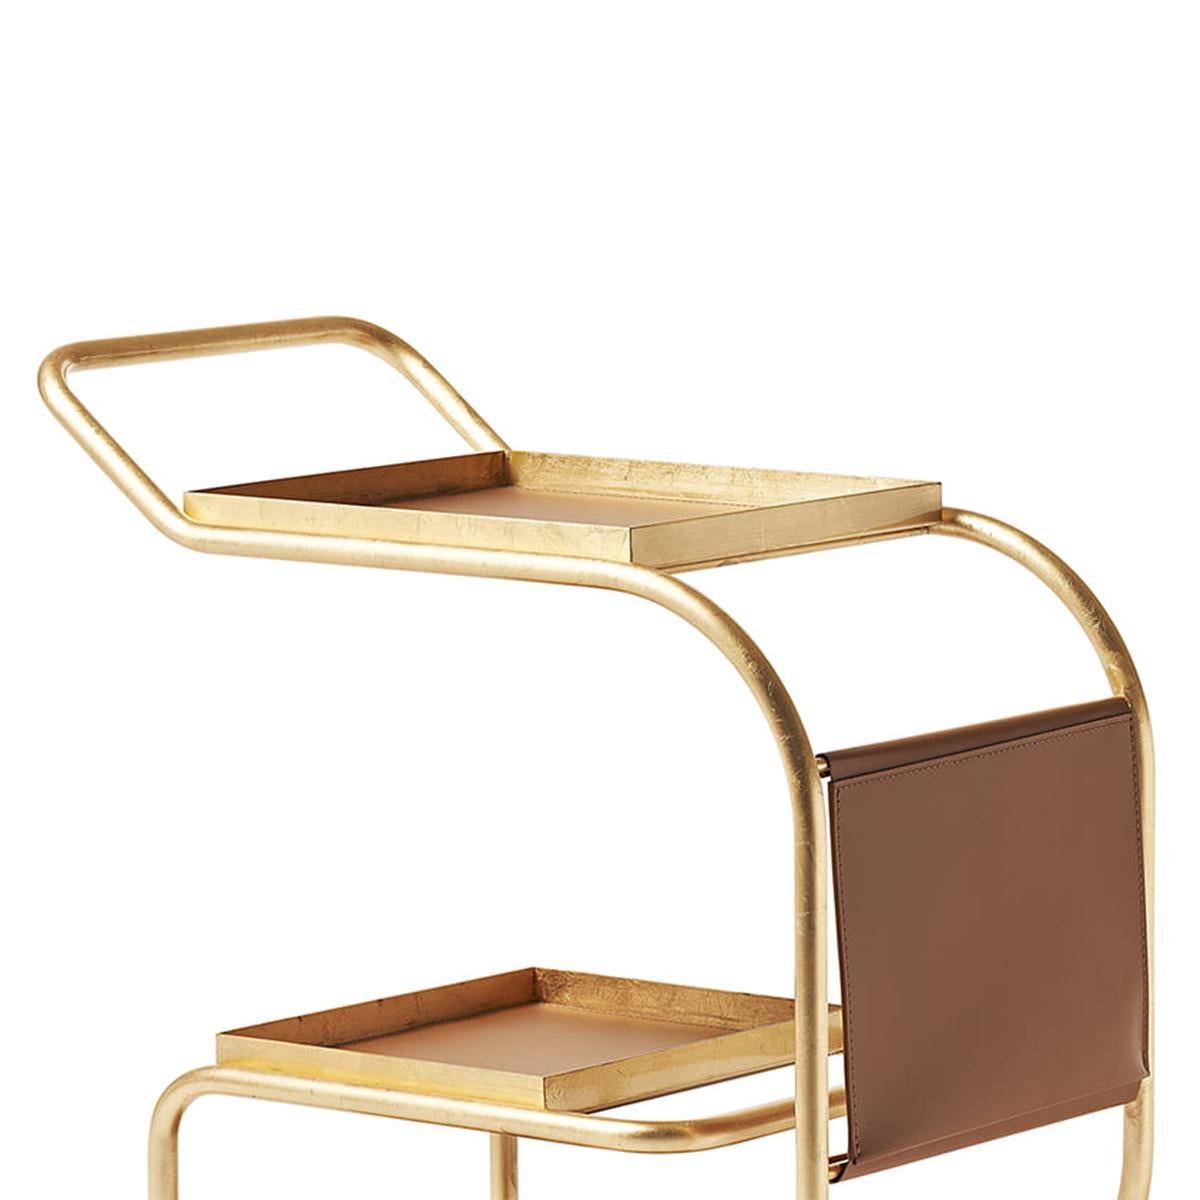 Trolley Stewart Gold with steel structure in gold leaf
Finish, with steel trays covered with natural brown leather 
And with newspaper pocket. 2 of the trays are removable.
Trolley with 4 pivoting casters.
Also available in white matte finish or